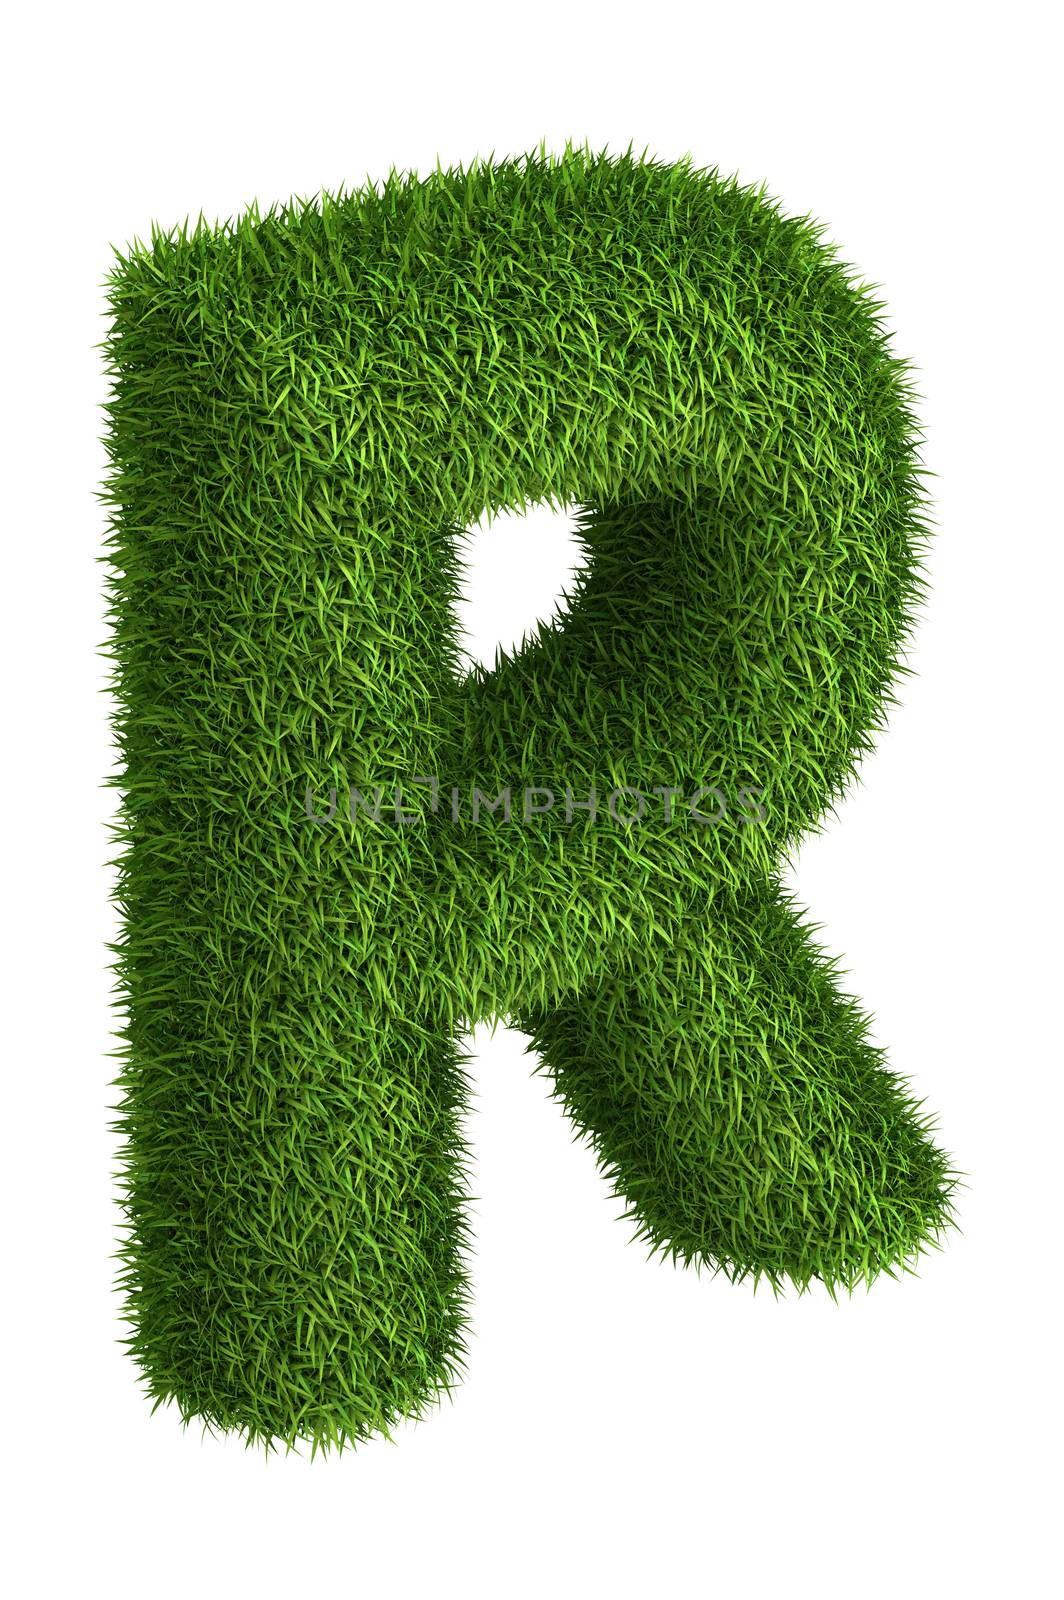 3D Letter R photo realistic isometric projection grass ecology theme on white